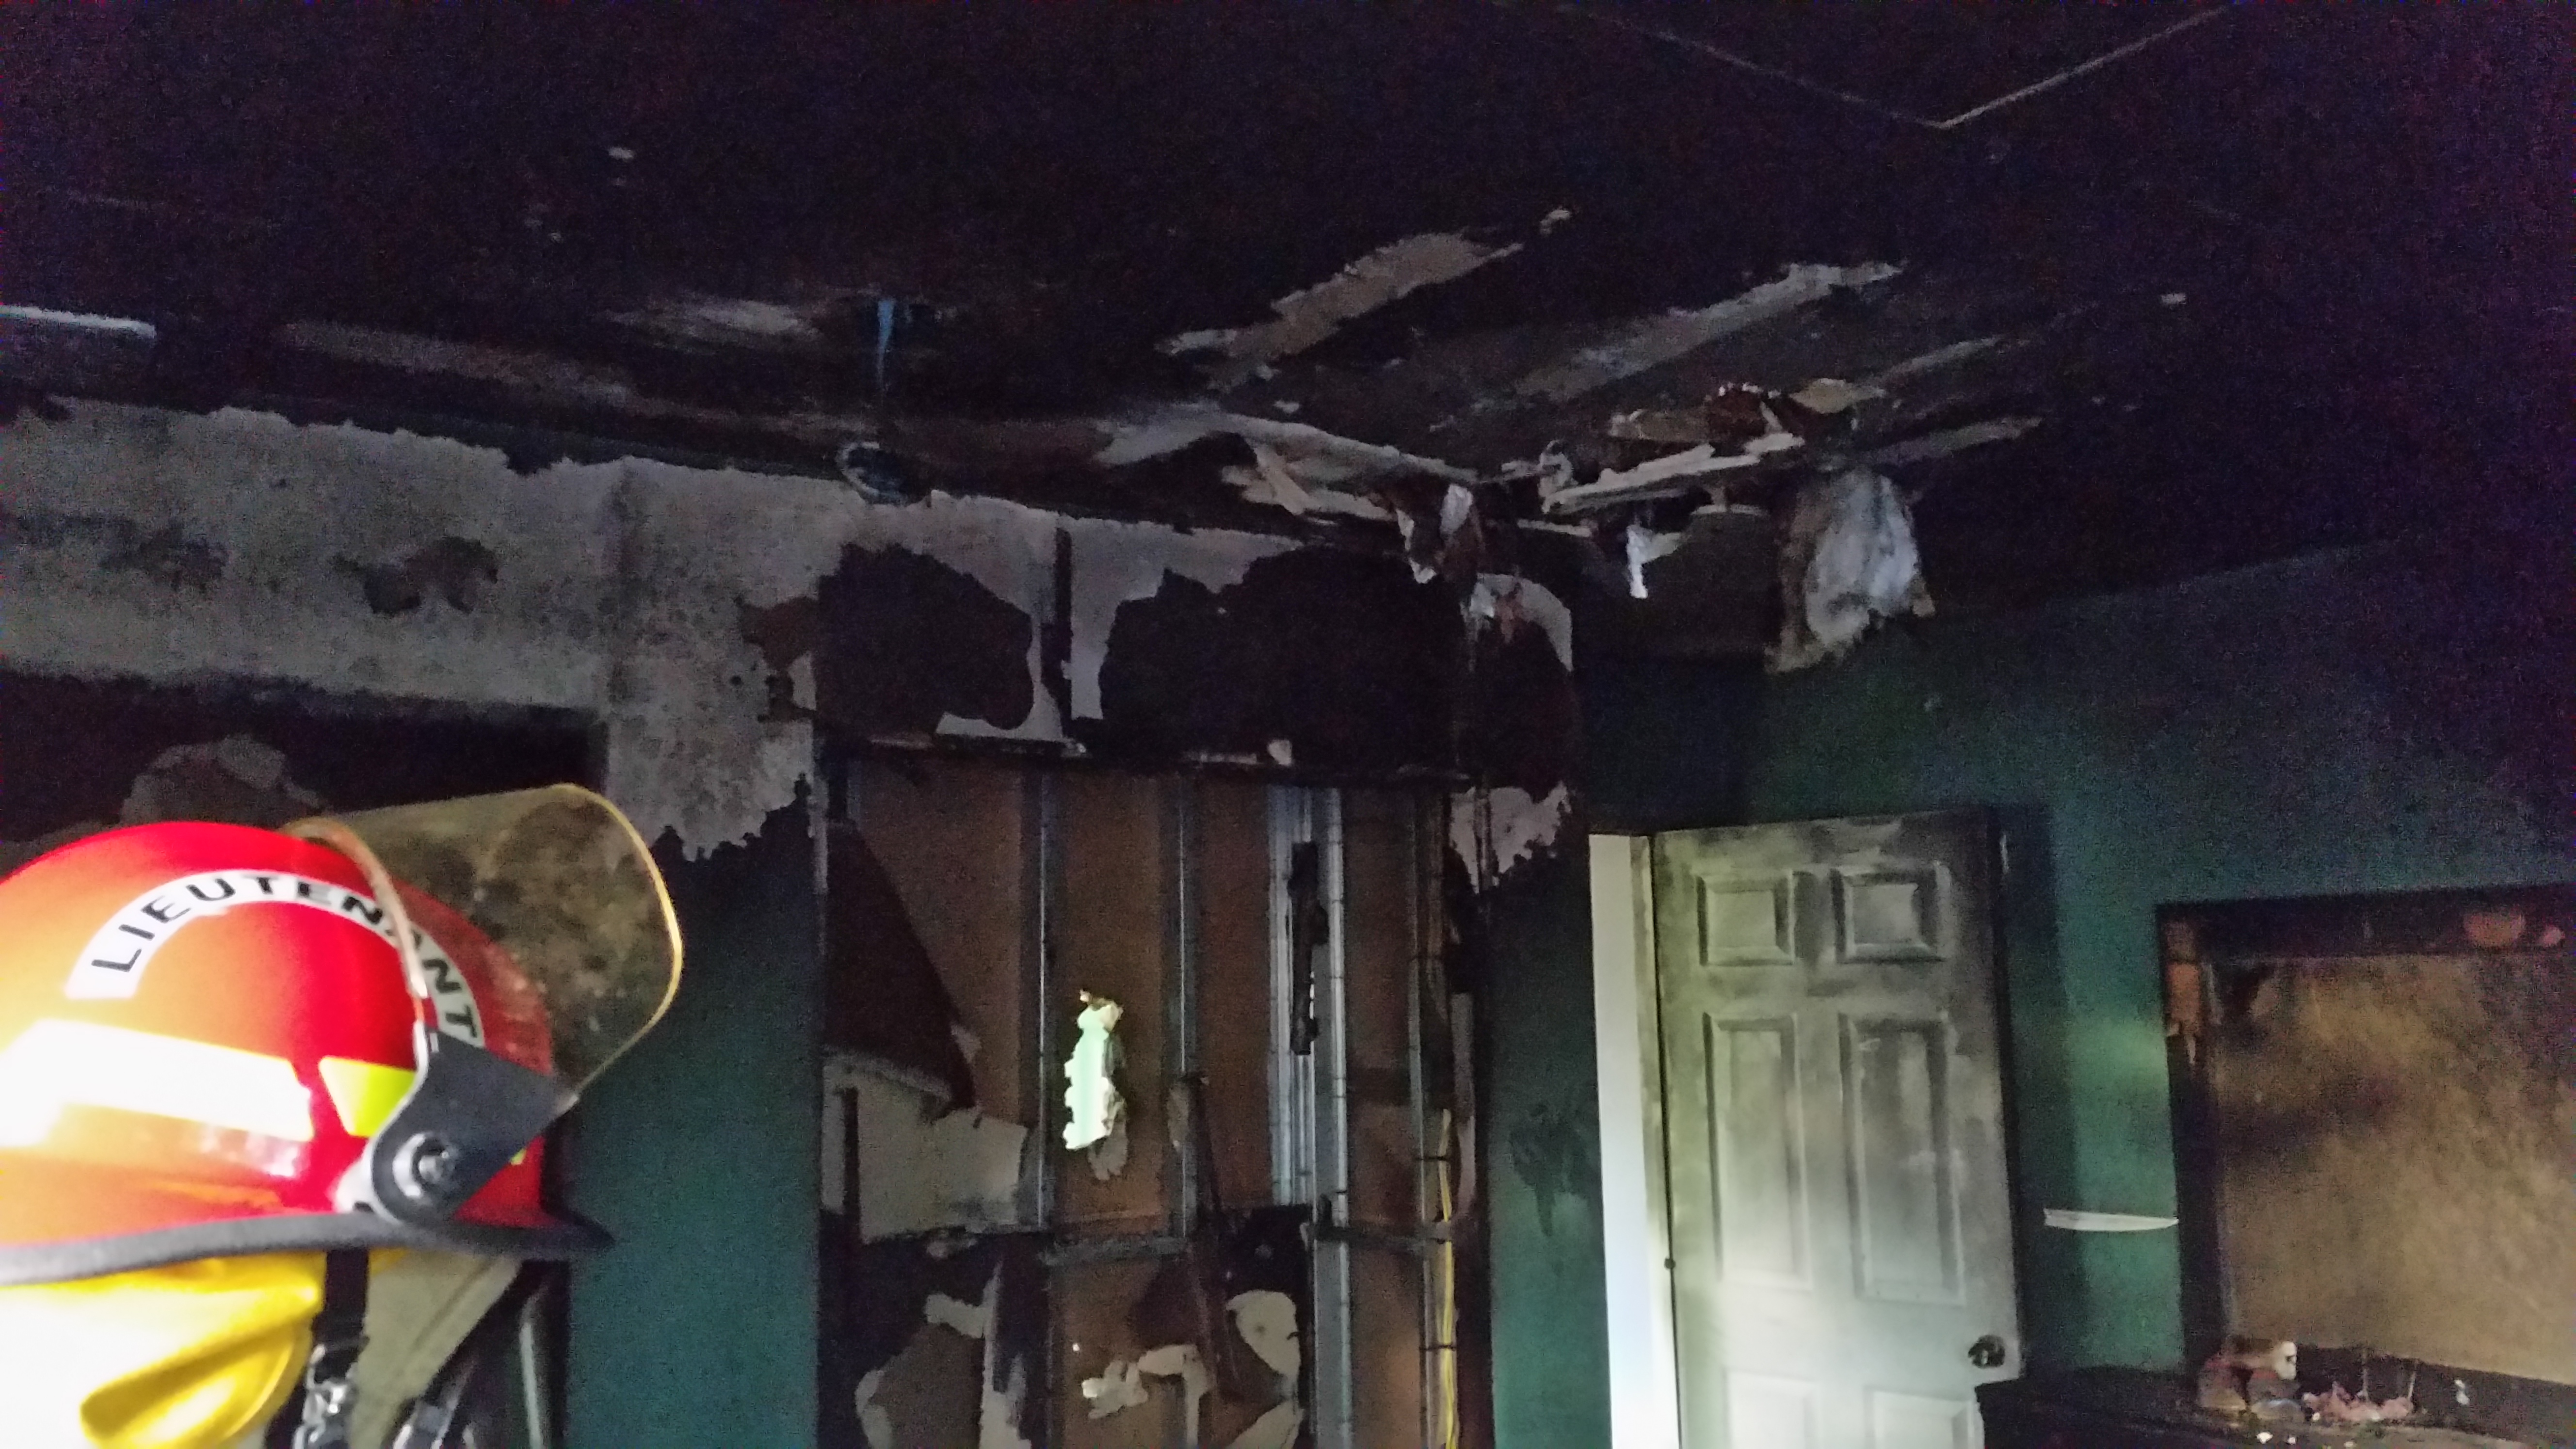 A view of an inside room of the home after members of the Hialeah Fire Department extinguished the blaze. (Source: Hialeah Fire Department)